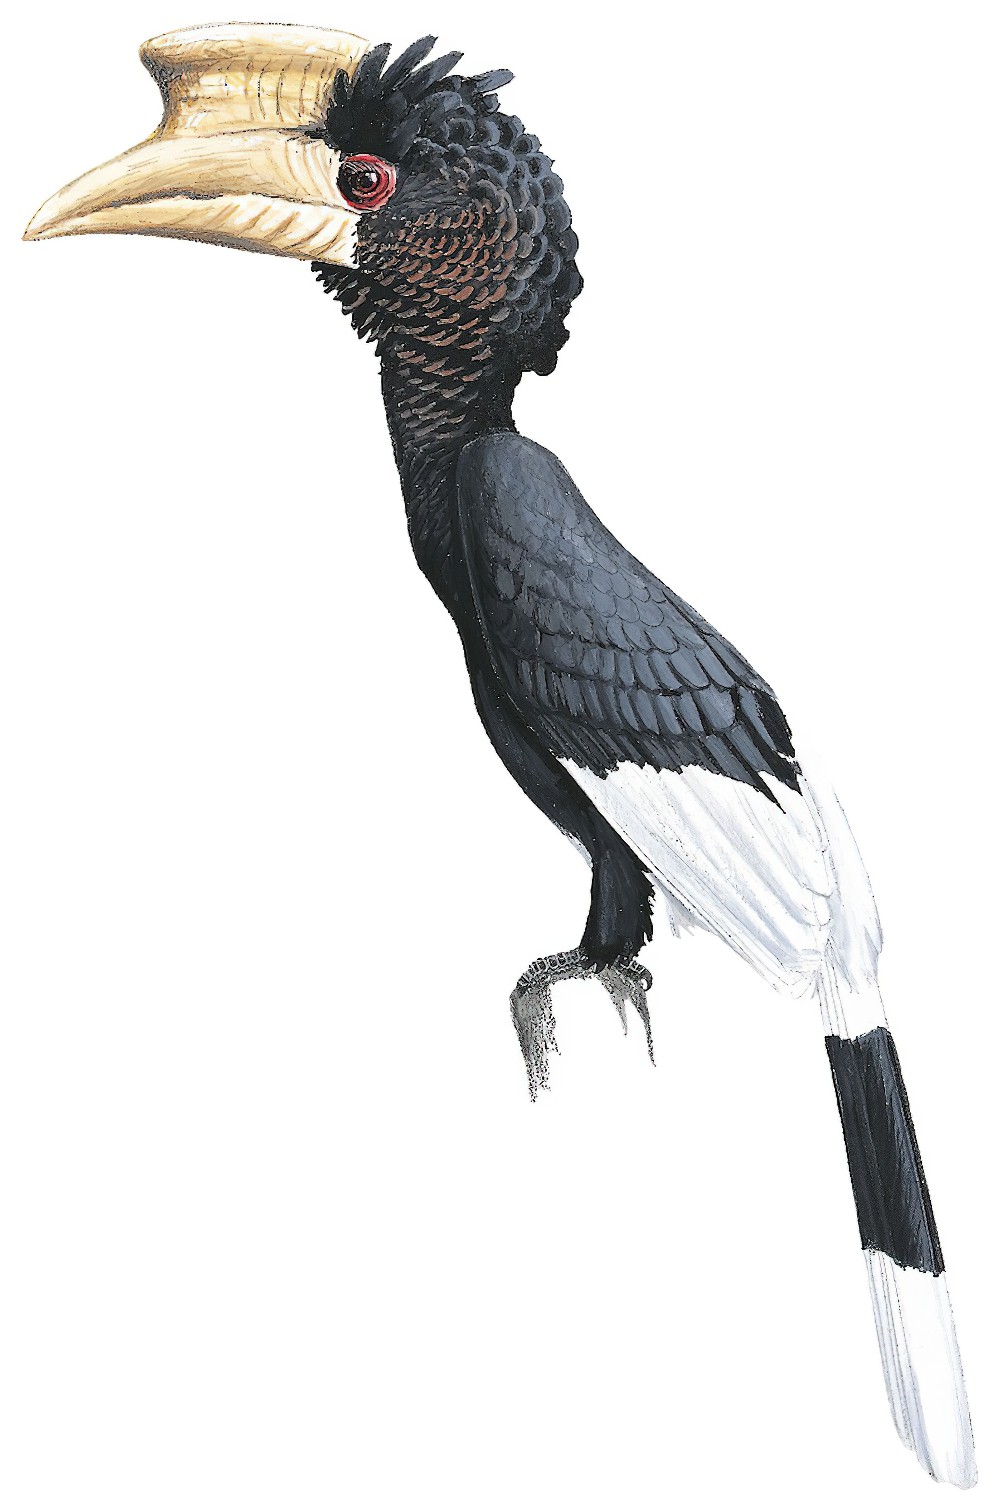 Brown-cheeked Hornbill / Bycanistes cylindricus